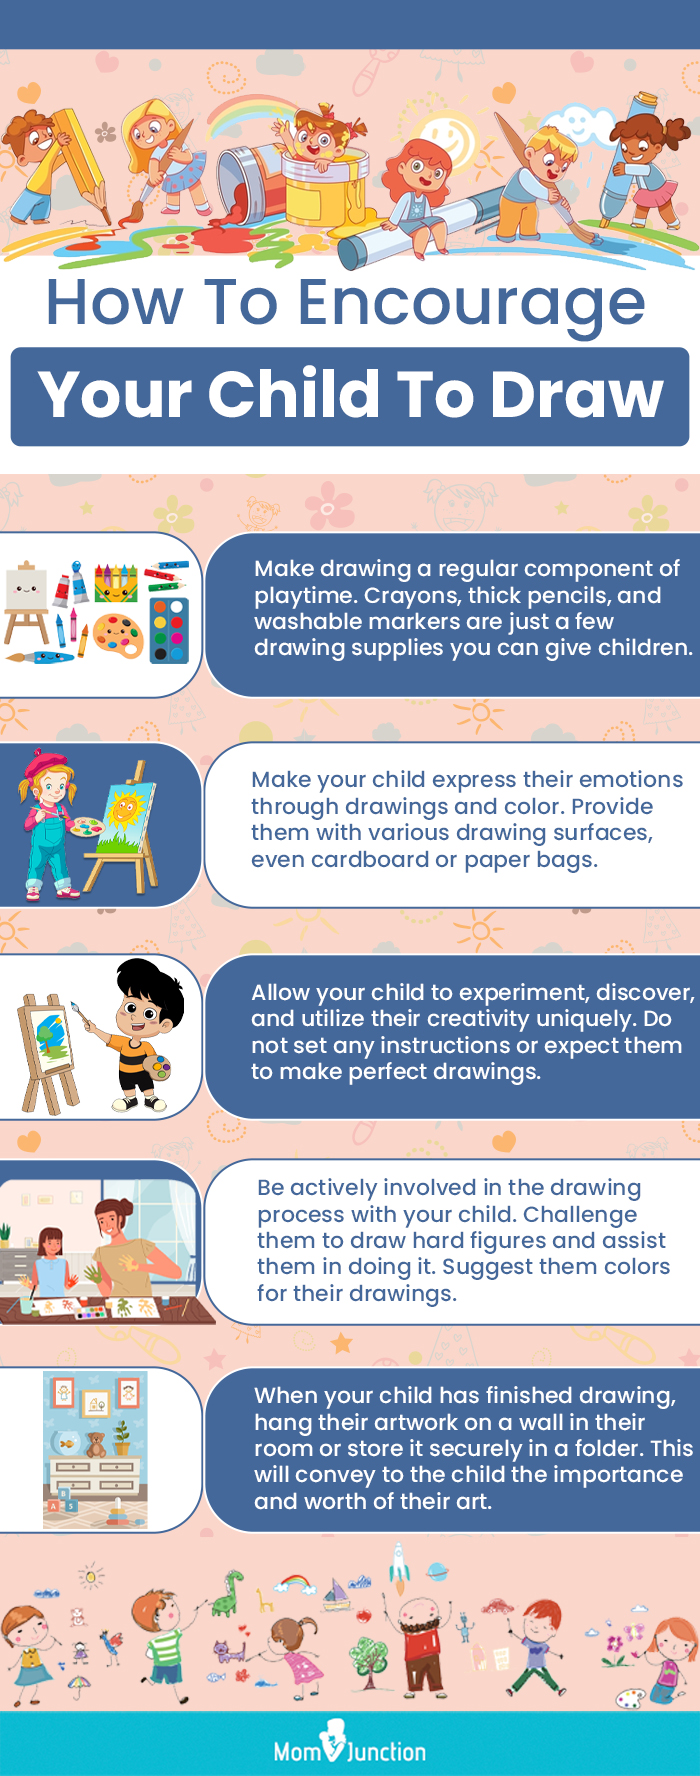 how to encourage your child to draw (infographic)